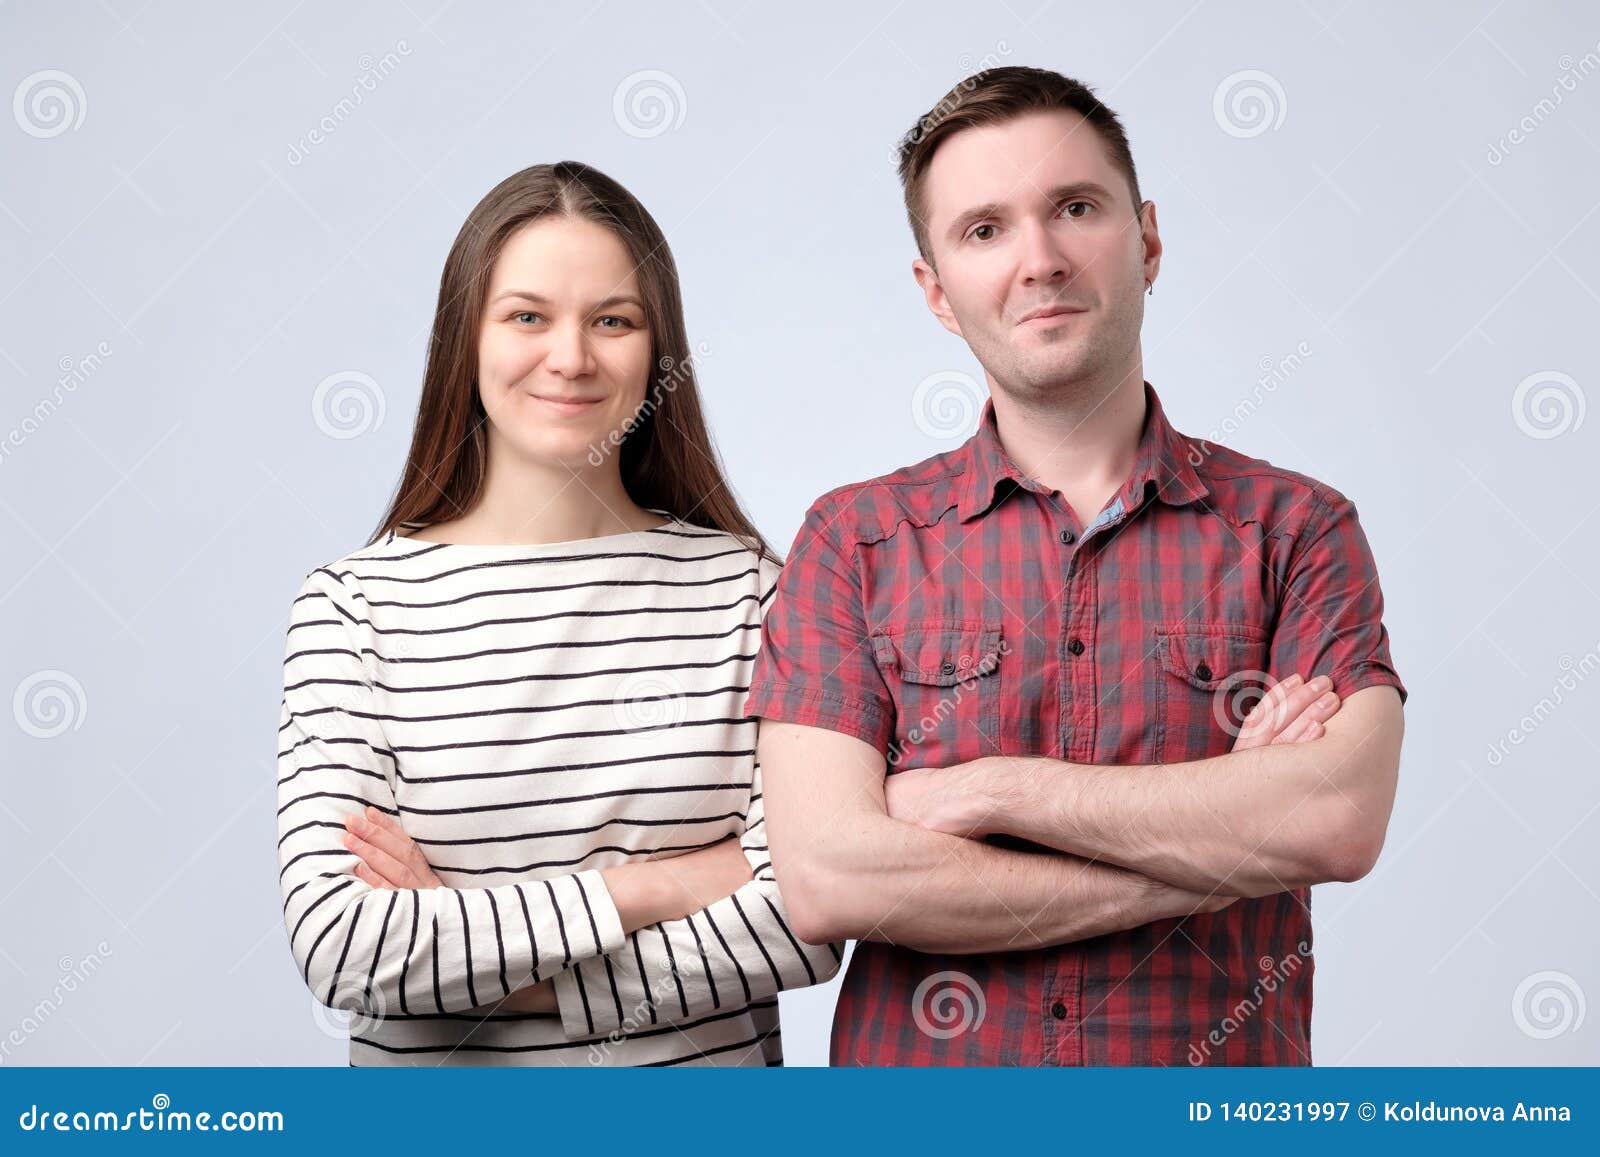 https://thumbs.dreamstime.com/z/cheerful-european-young-couple-standing-white-background-looking-camera-confidentce-cheerful-european-young-couple-140231997.jpg